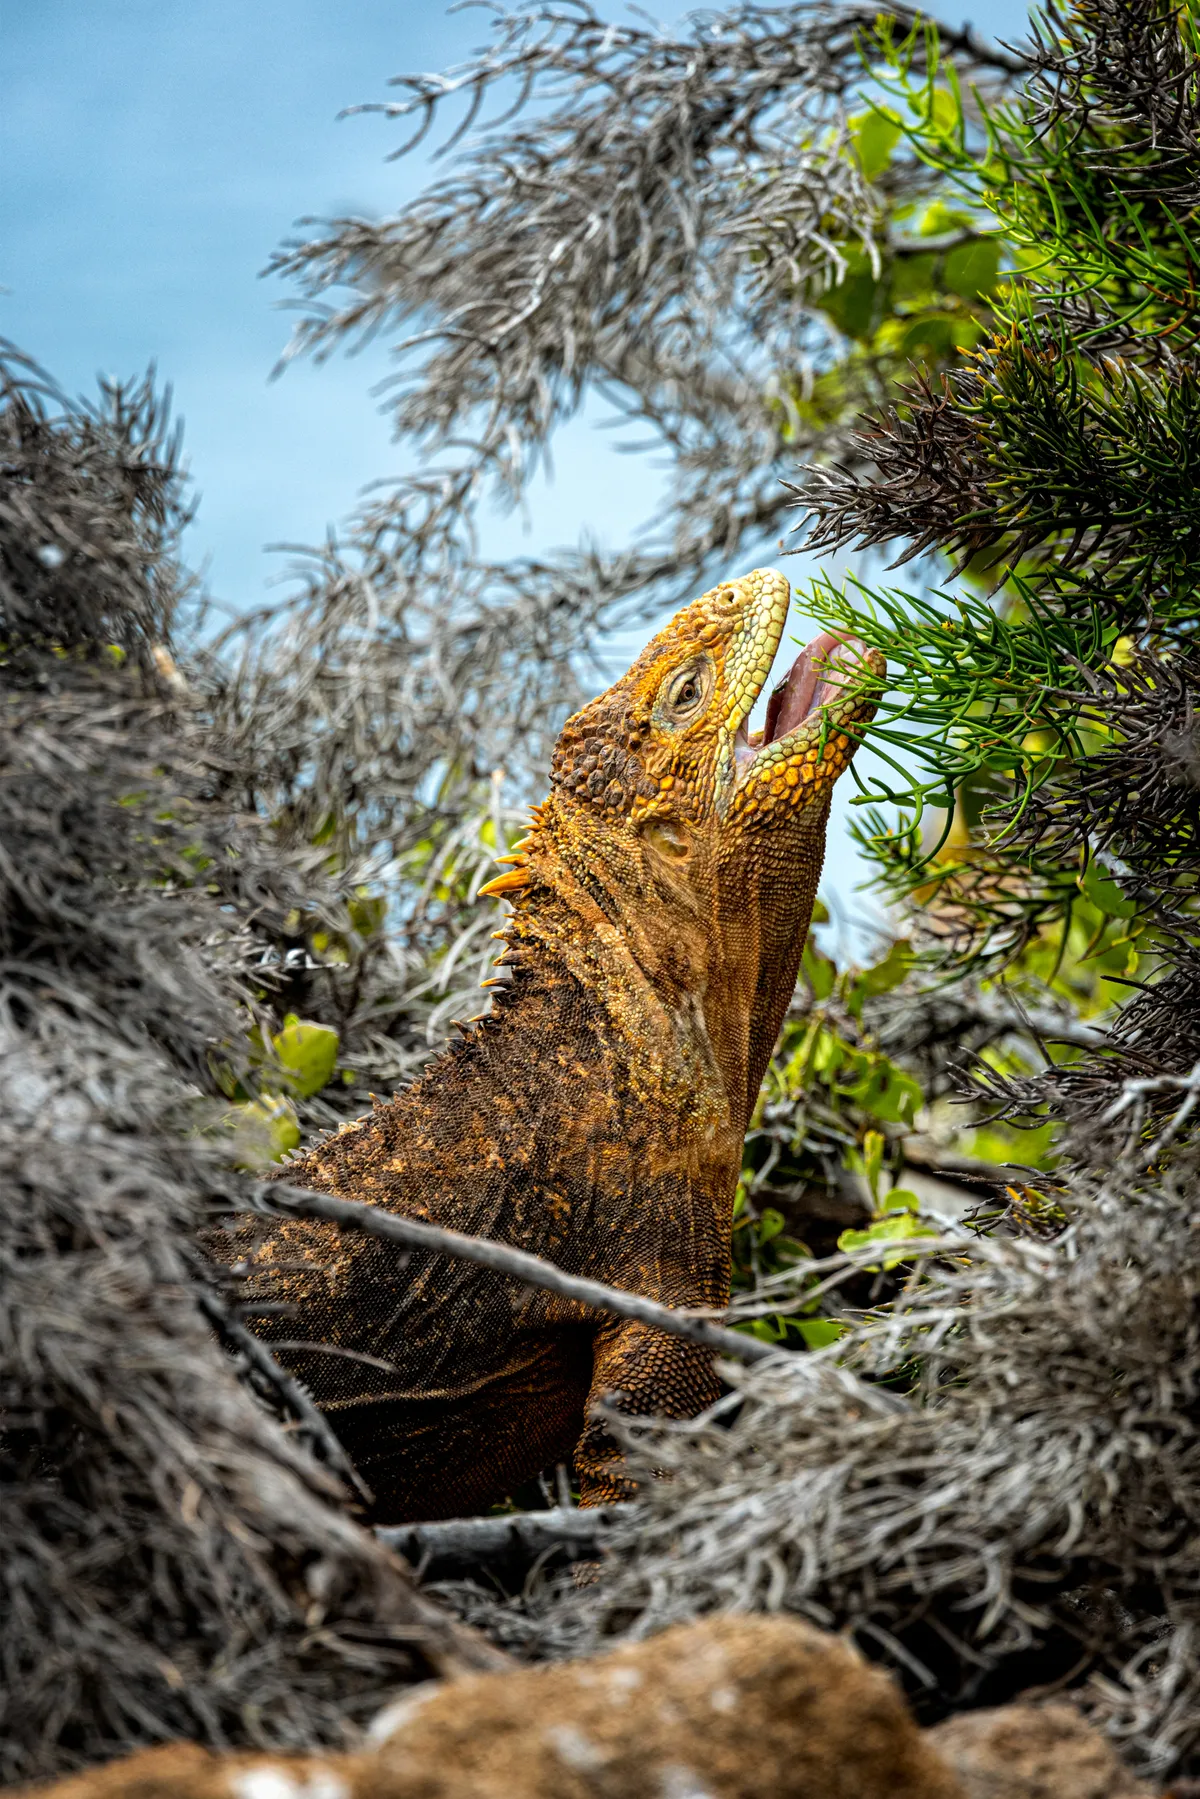 1st place Animals in Action: Galápagos land iguana on North Seymour island. © Leighton Lum/Galapagos Conservation Trust